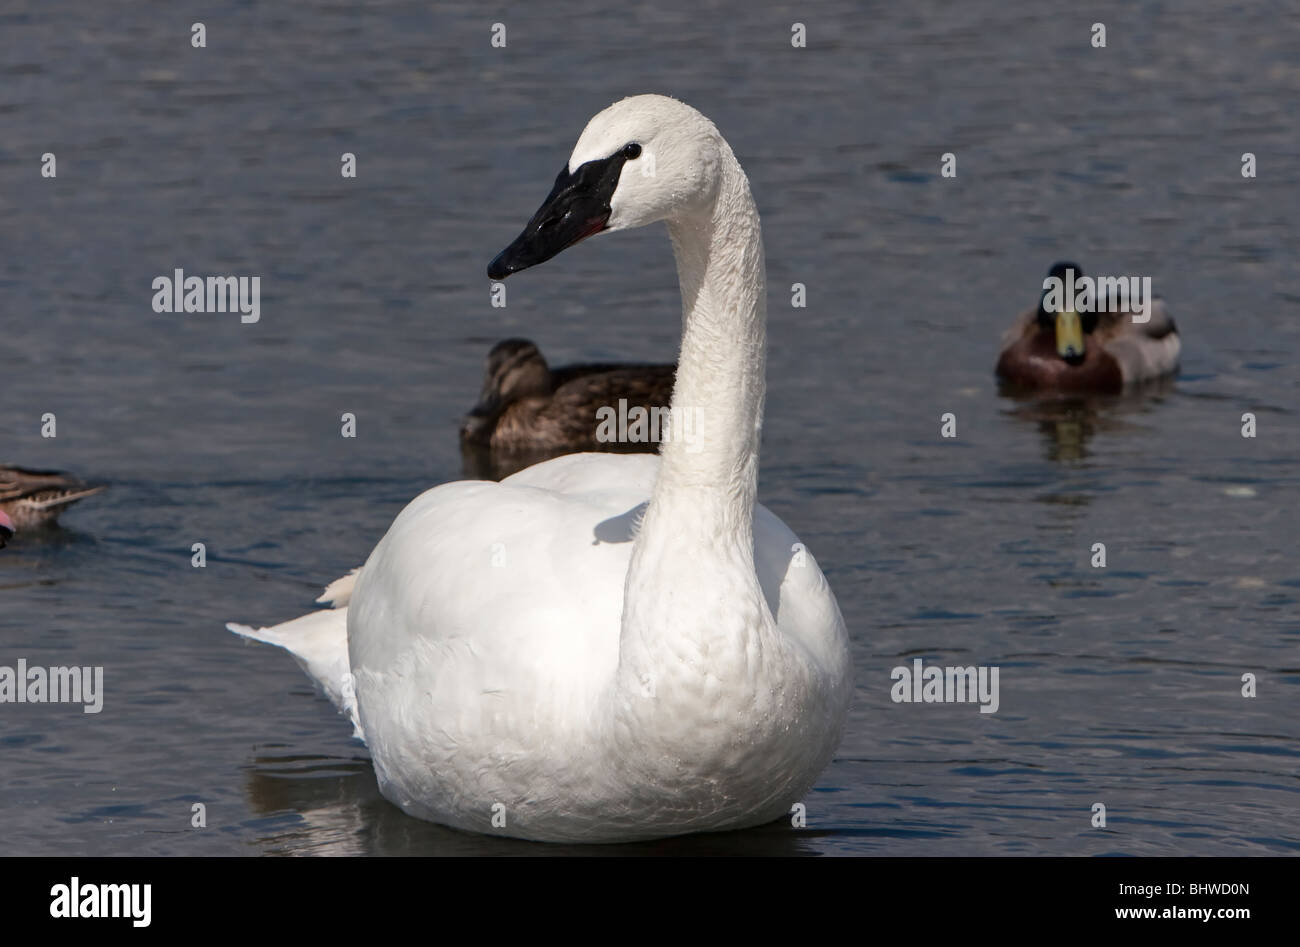 Trumpeter Swan Cygnus buccinator at Esquimalt Lagoon Victoria Vancouver Island BC in April with ducks behind Stock Photo